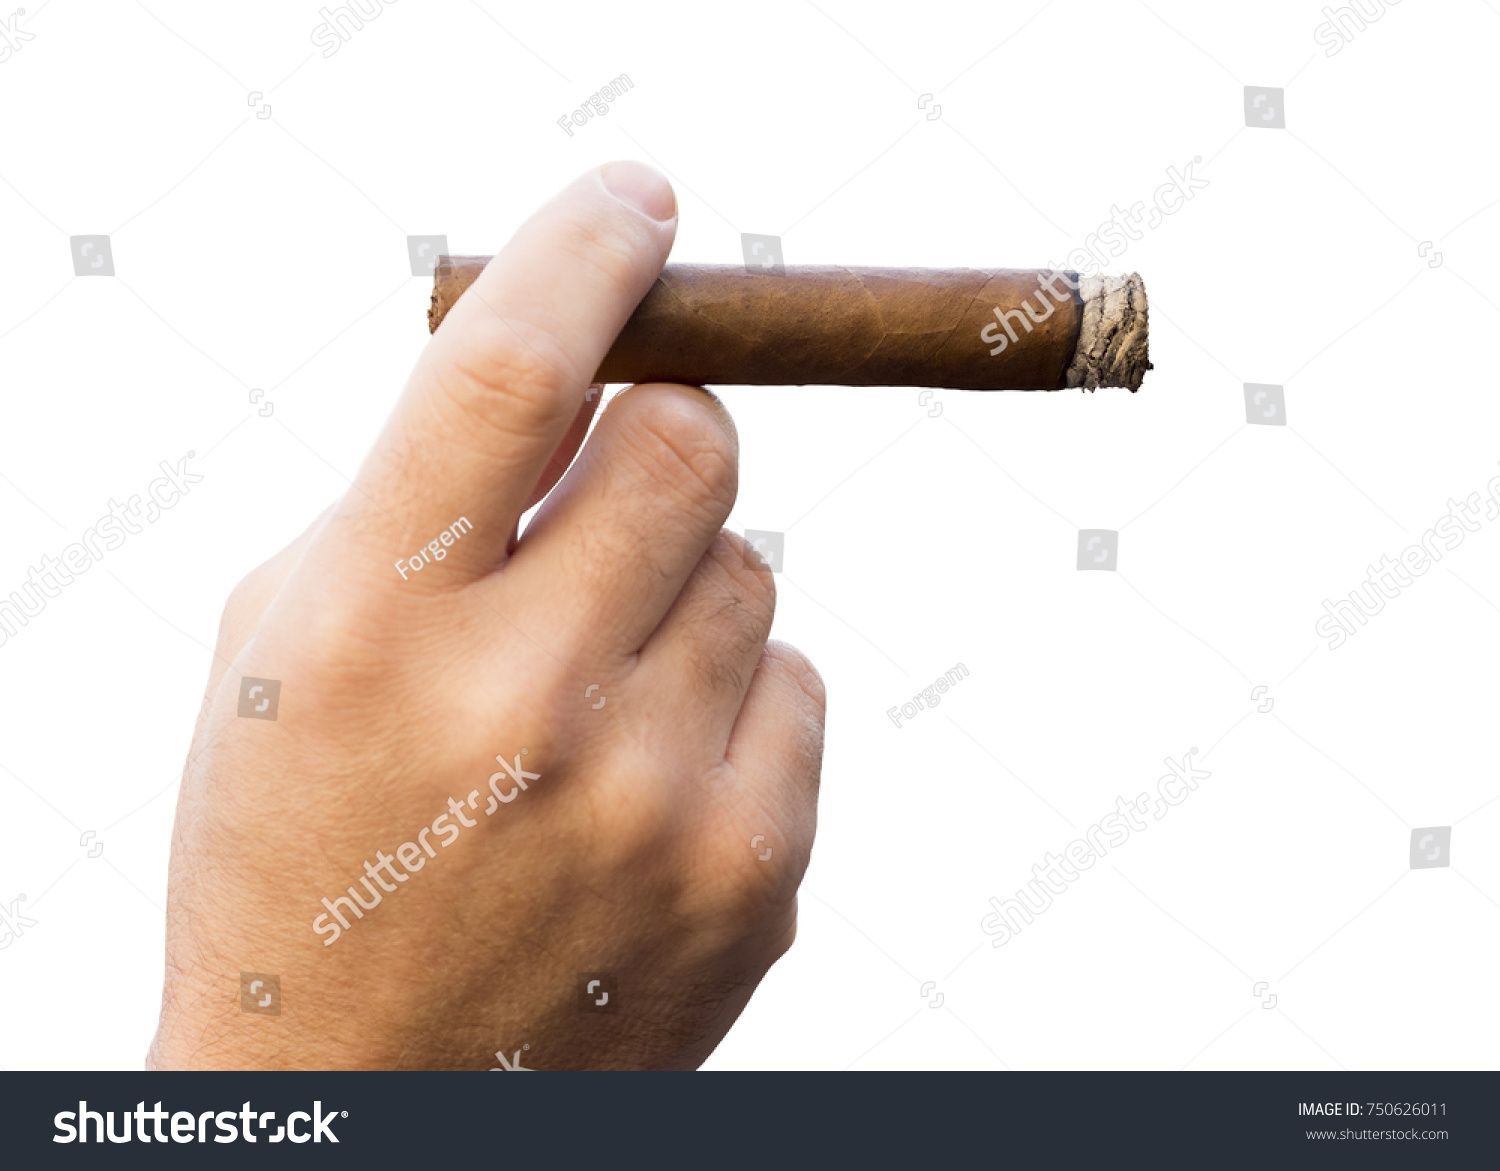 Detail of the hand of a smoking man holding a burning cigar, isolated on a white background #750626011